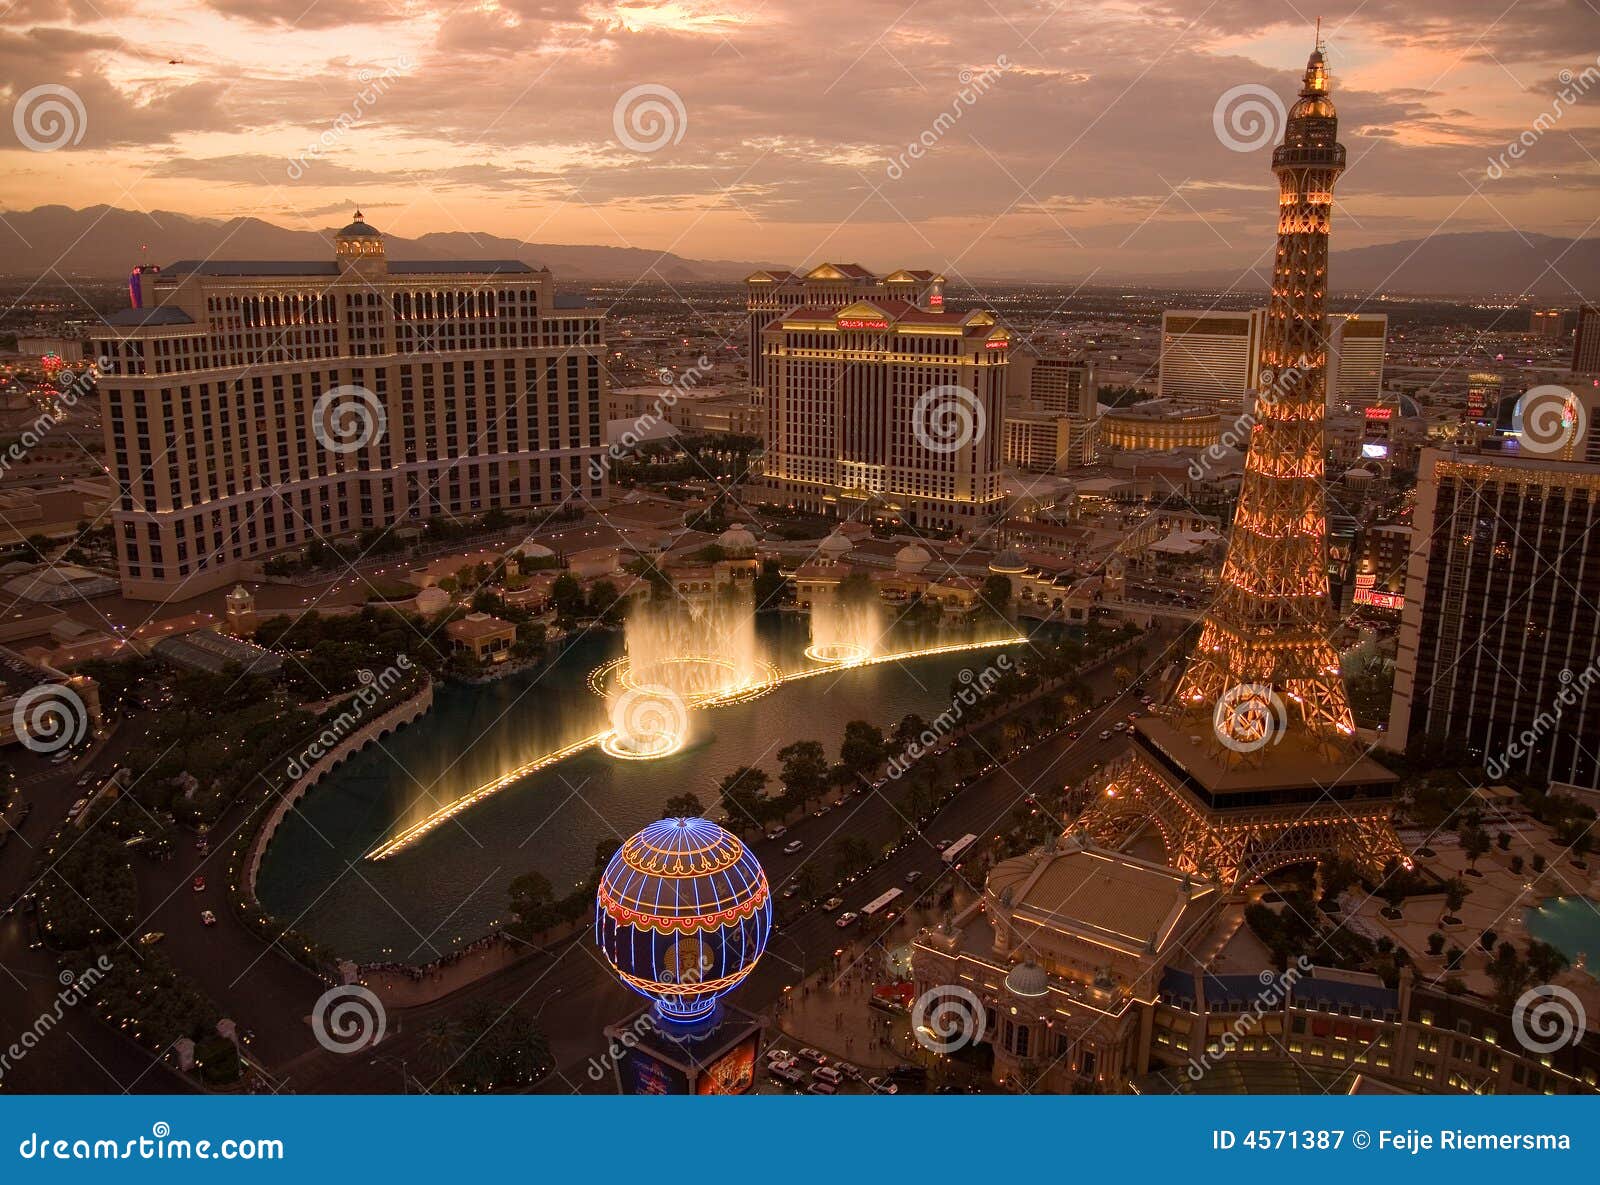 Las Vegas City Skyline At Sunset Background, Pictures Of Nevada